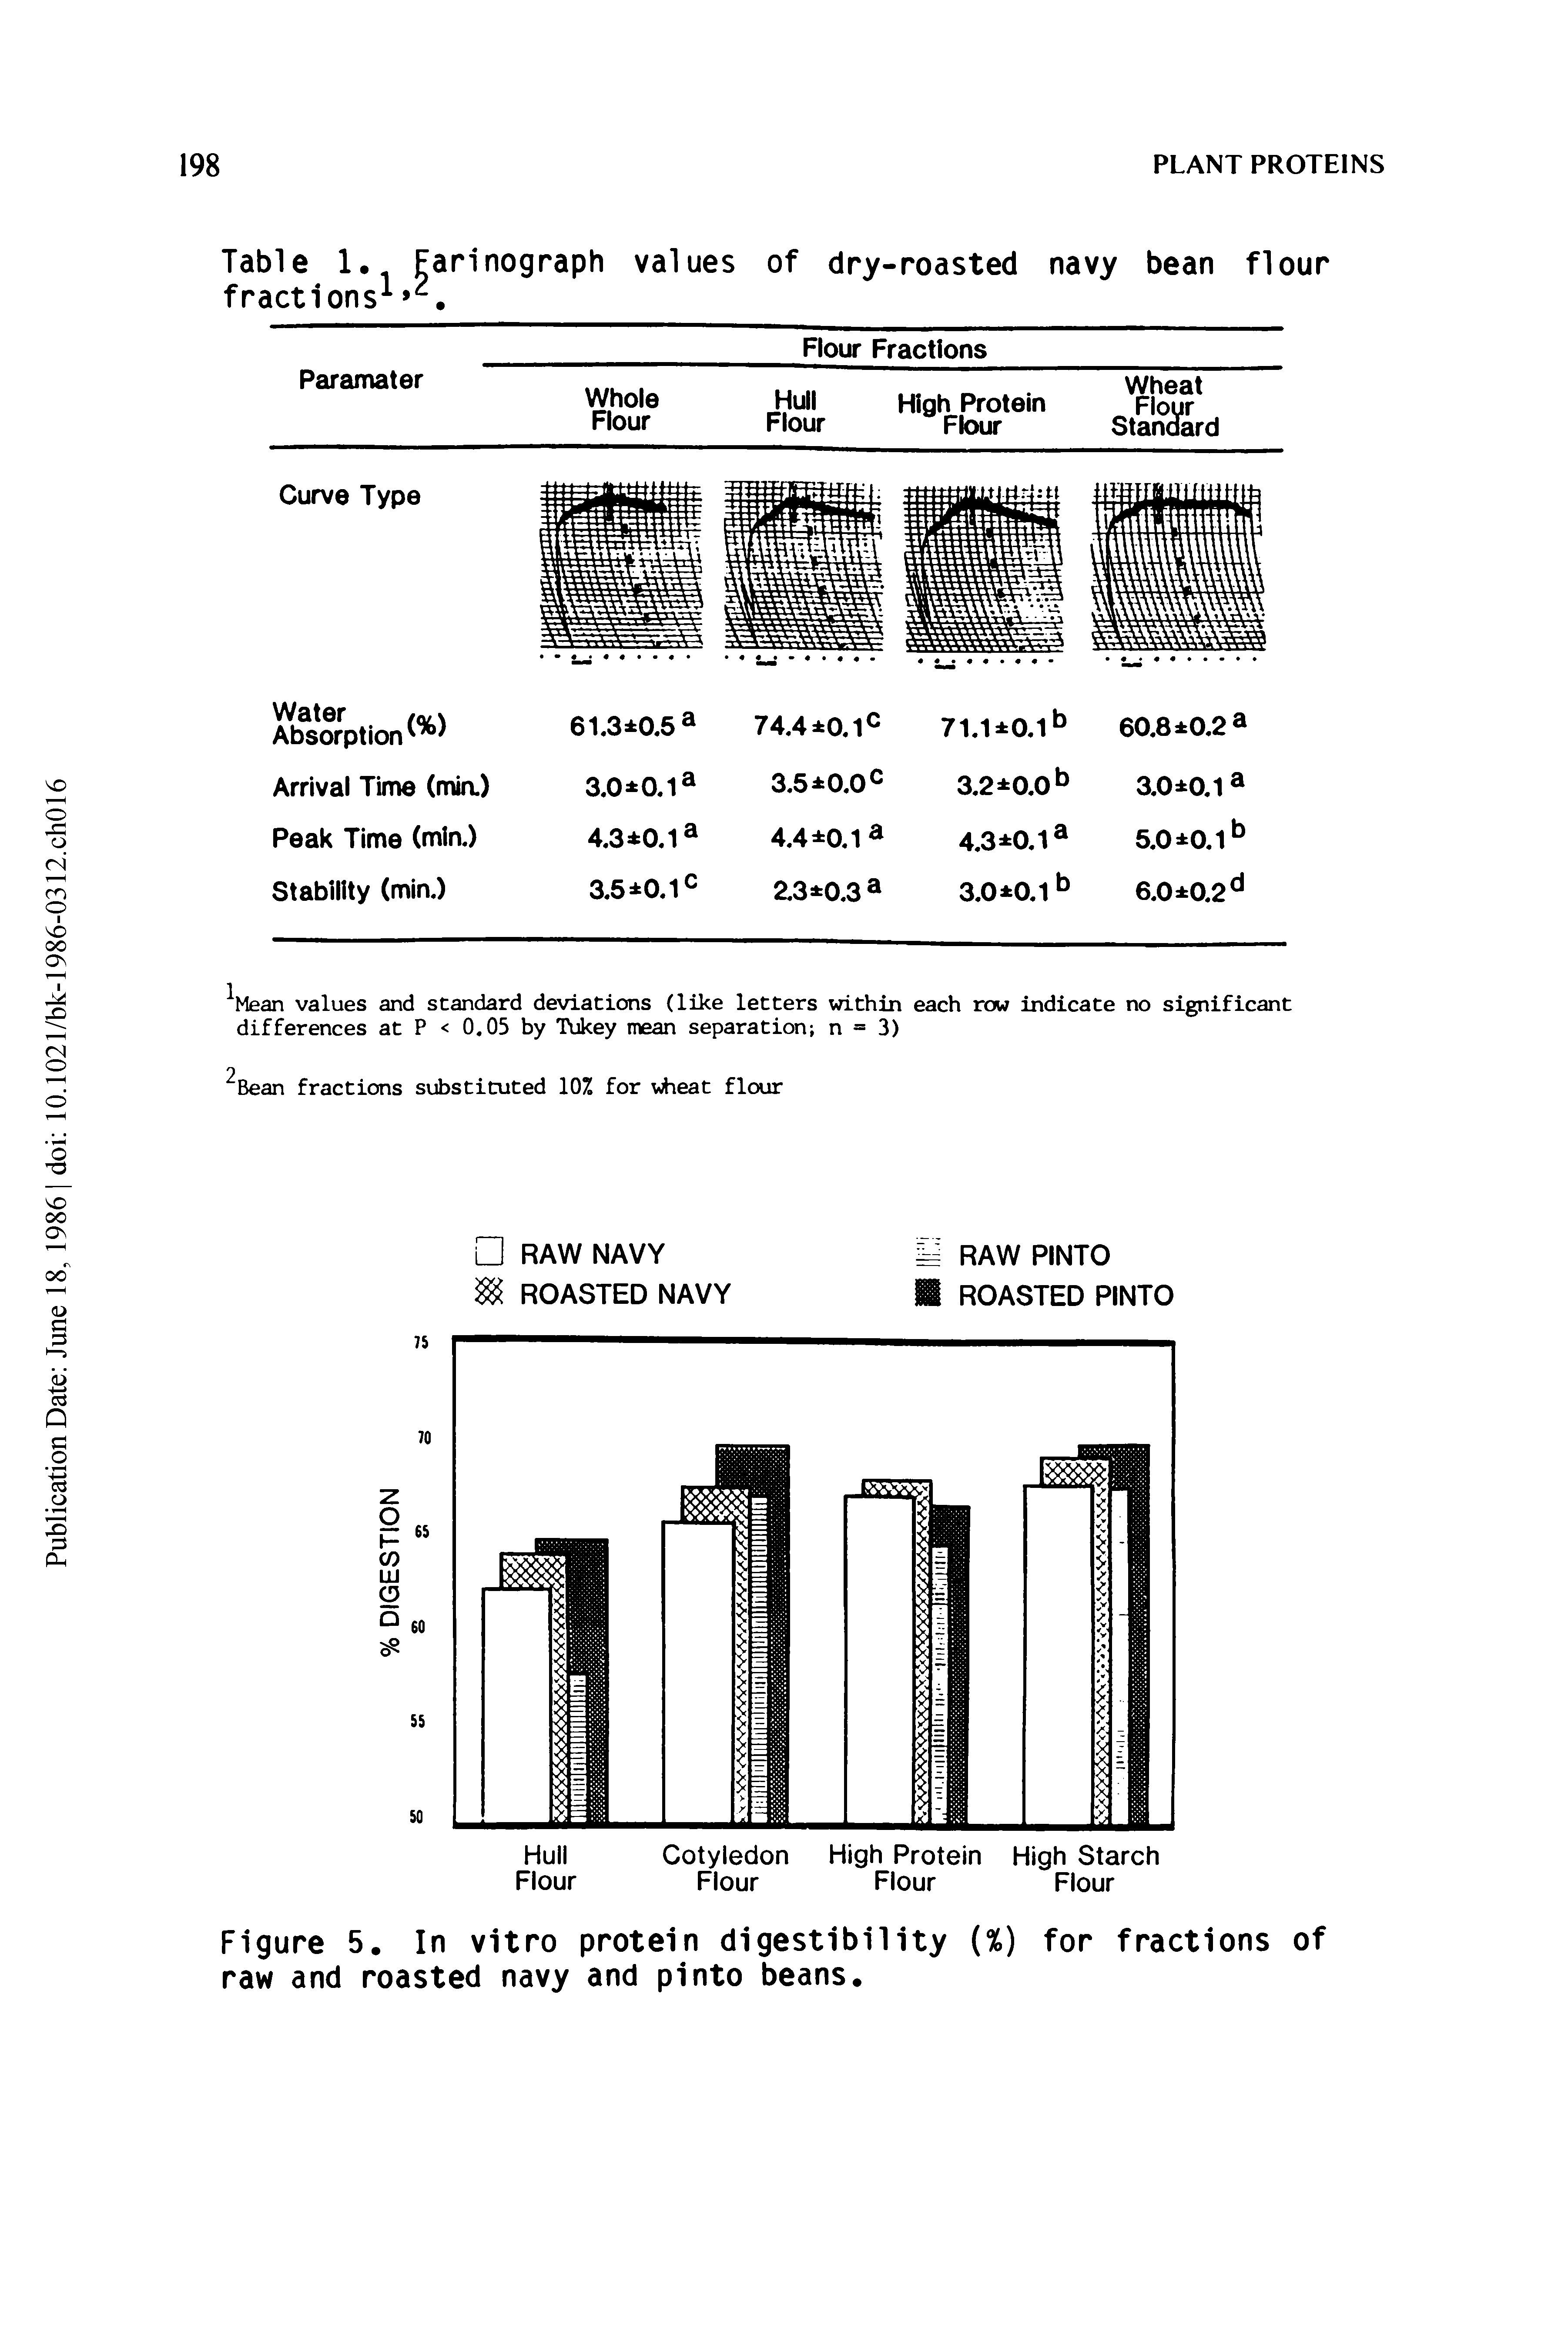 Figure 5. In vitro protein digestibility (%) for fractions of raw and roasted navy and pinto beans.